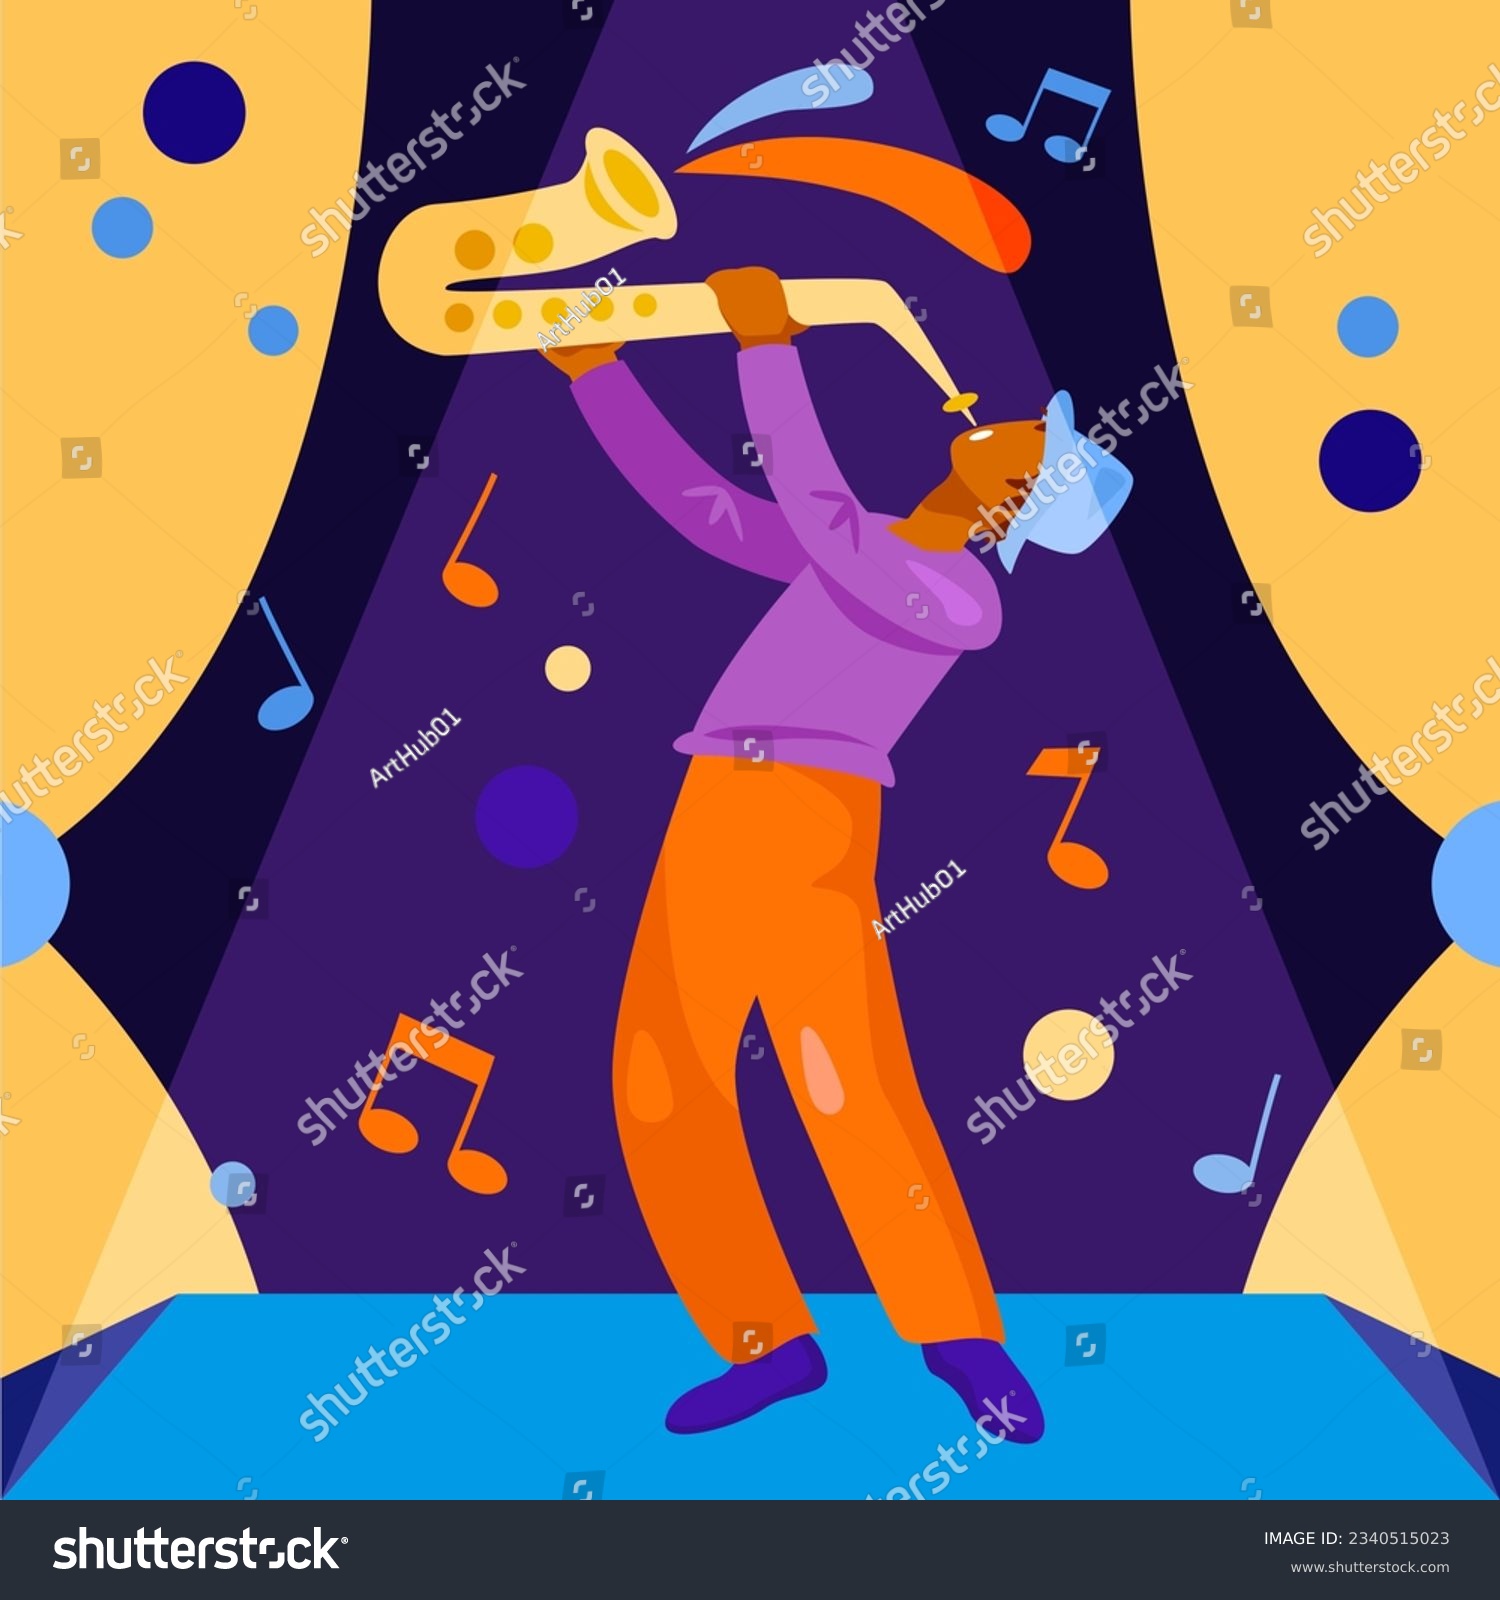 SVG of Jazz stylish musician playing saxophone on stage. Concept of creating music, hobby. Musicians playing on different instruments. Flat vector illustration in cartoon style svg